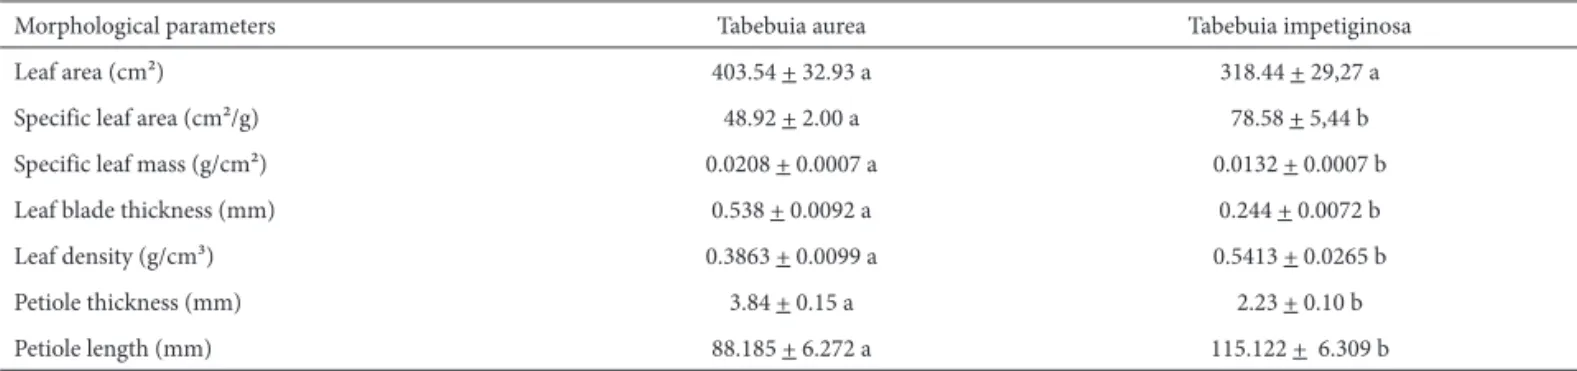 Table 1. Leaf morphological parameters of Tabebuia aurea and T. impetiginosa. Different lowercase letters indicate differences between the two species according  to Tukey’s test (P &lt; 0.05)